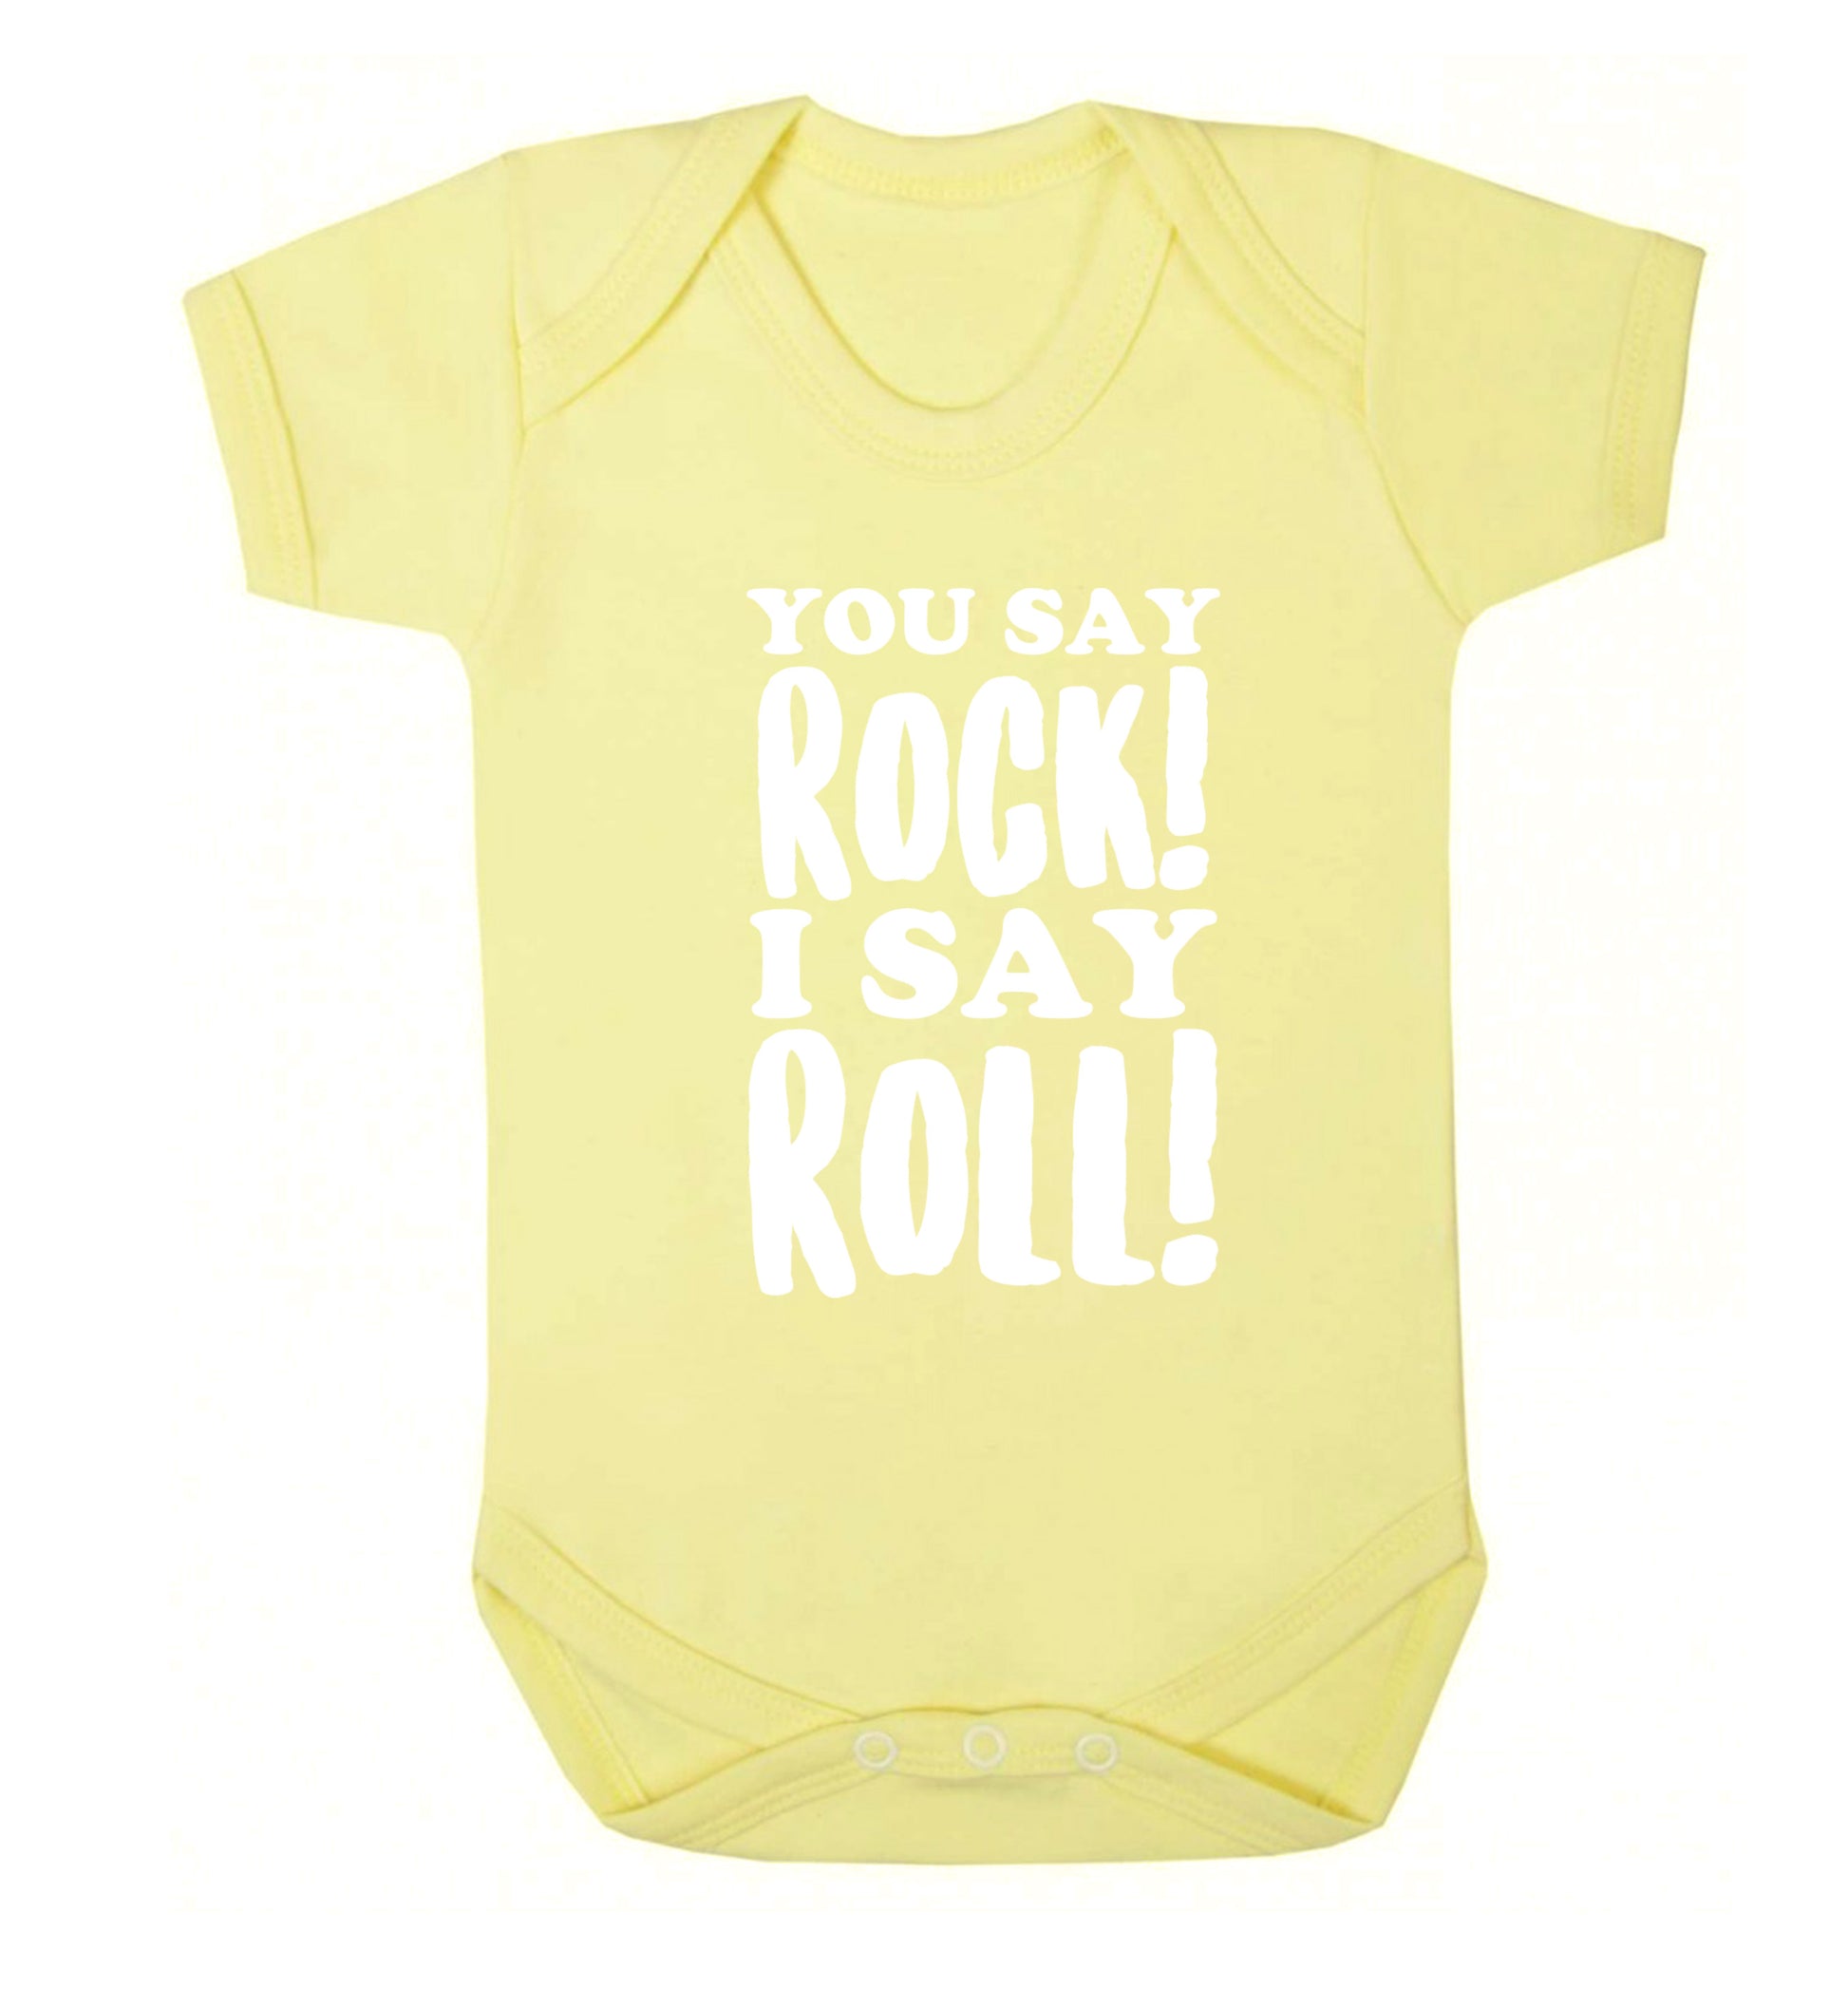 You say rock I say roll! Baby Vest pale yellow 18-24 months